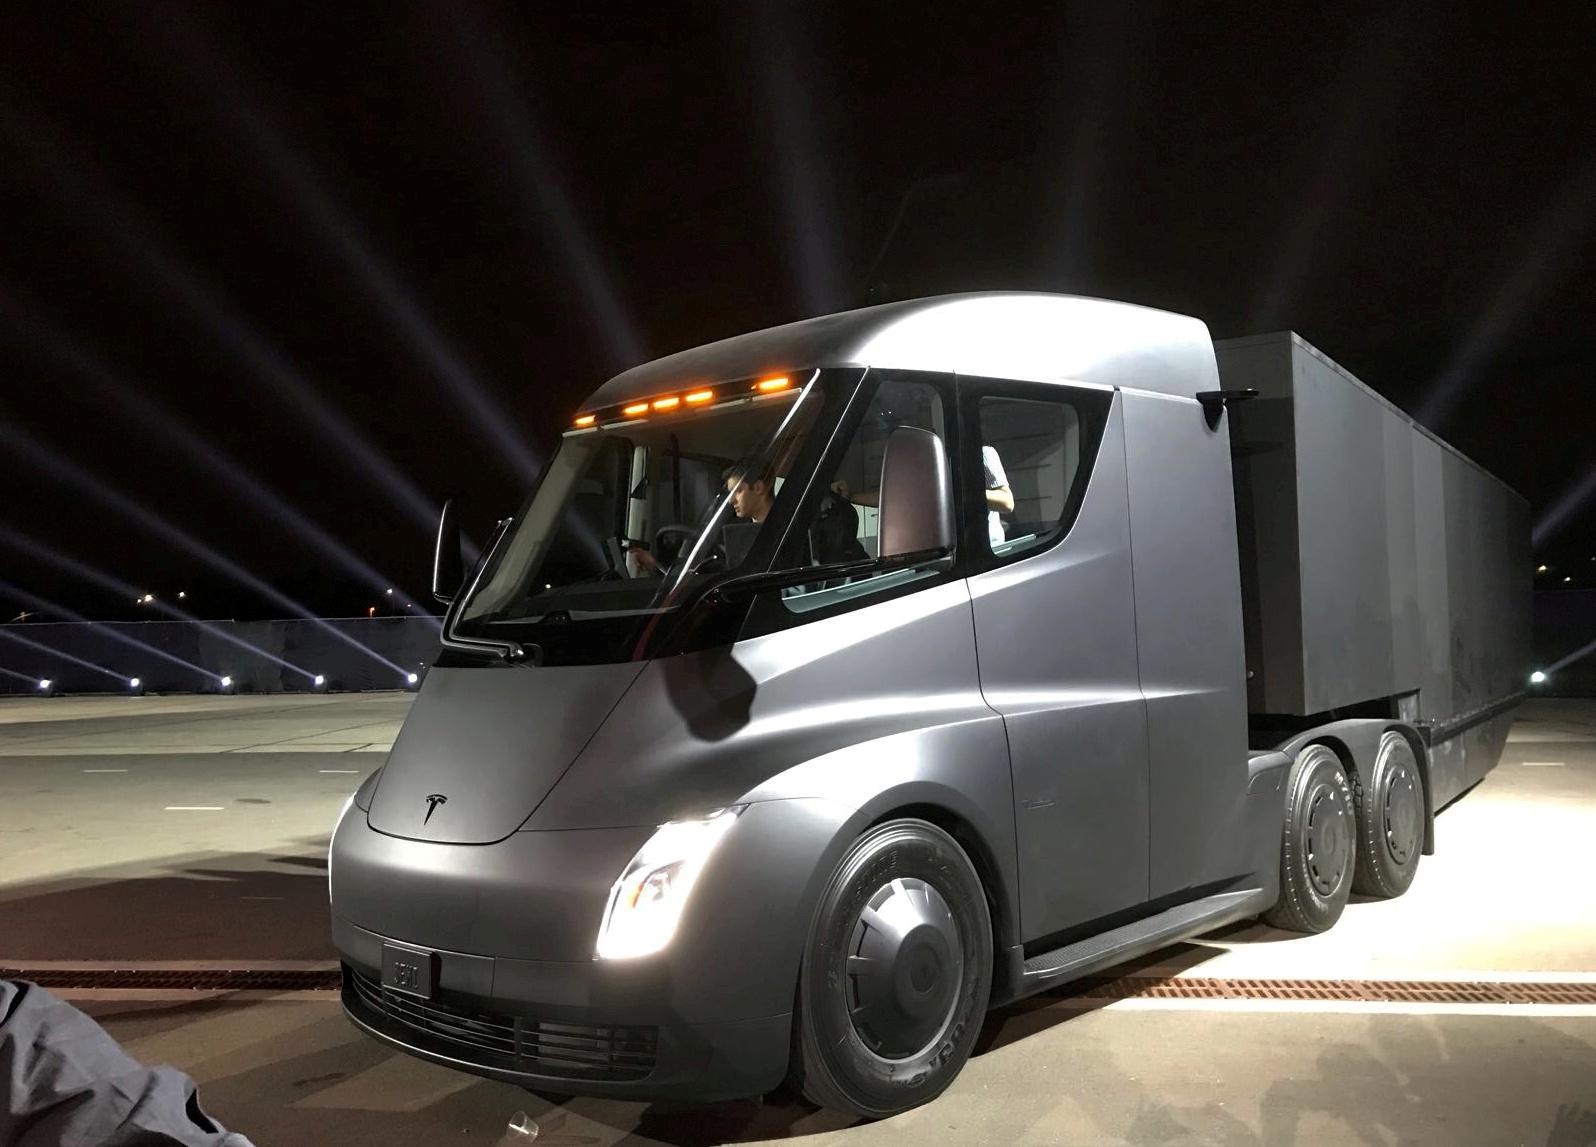 Tesla's new semi-truck is set to roll out next year